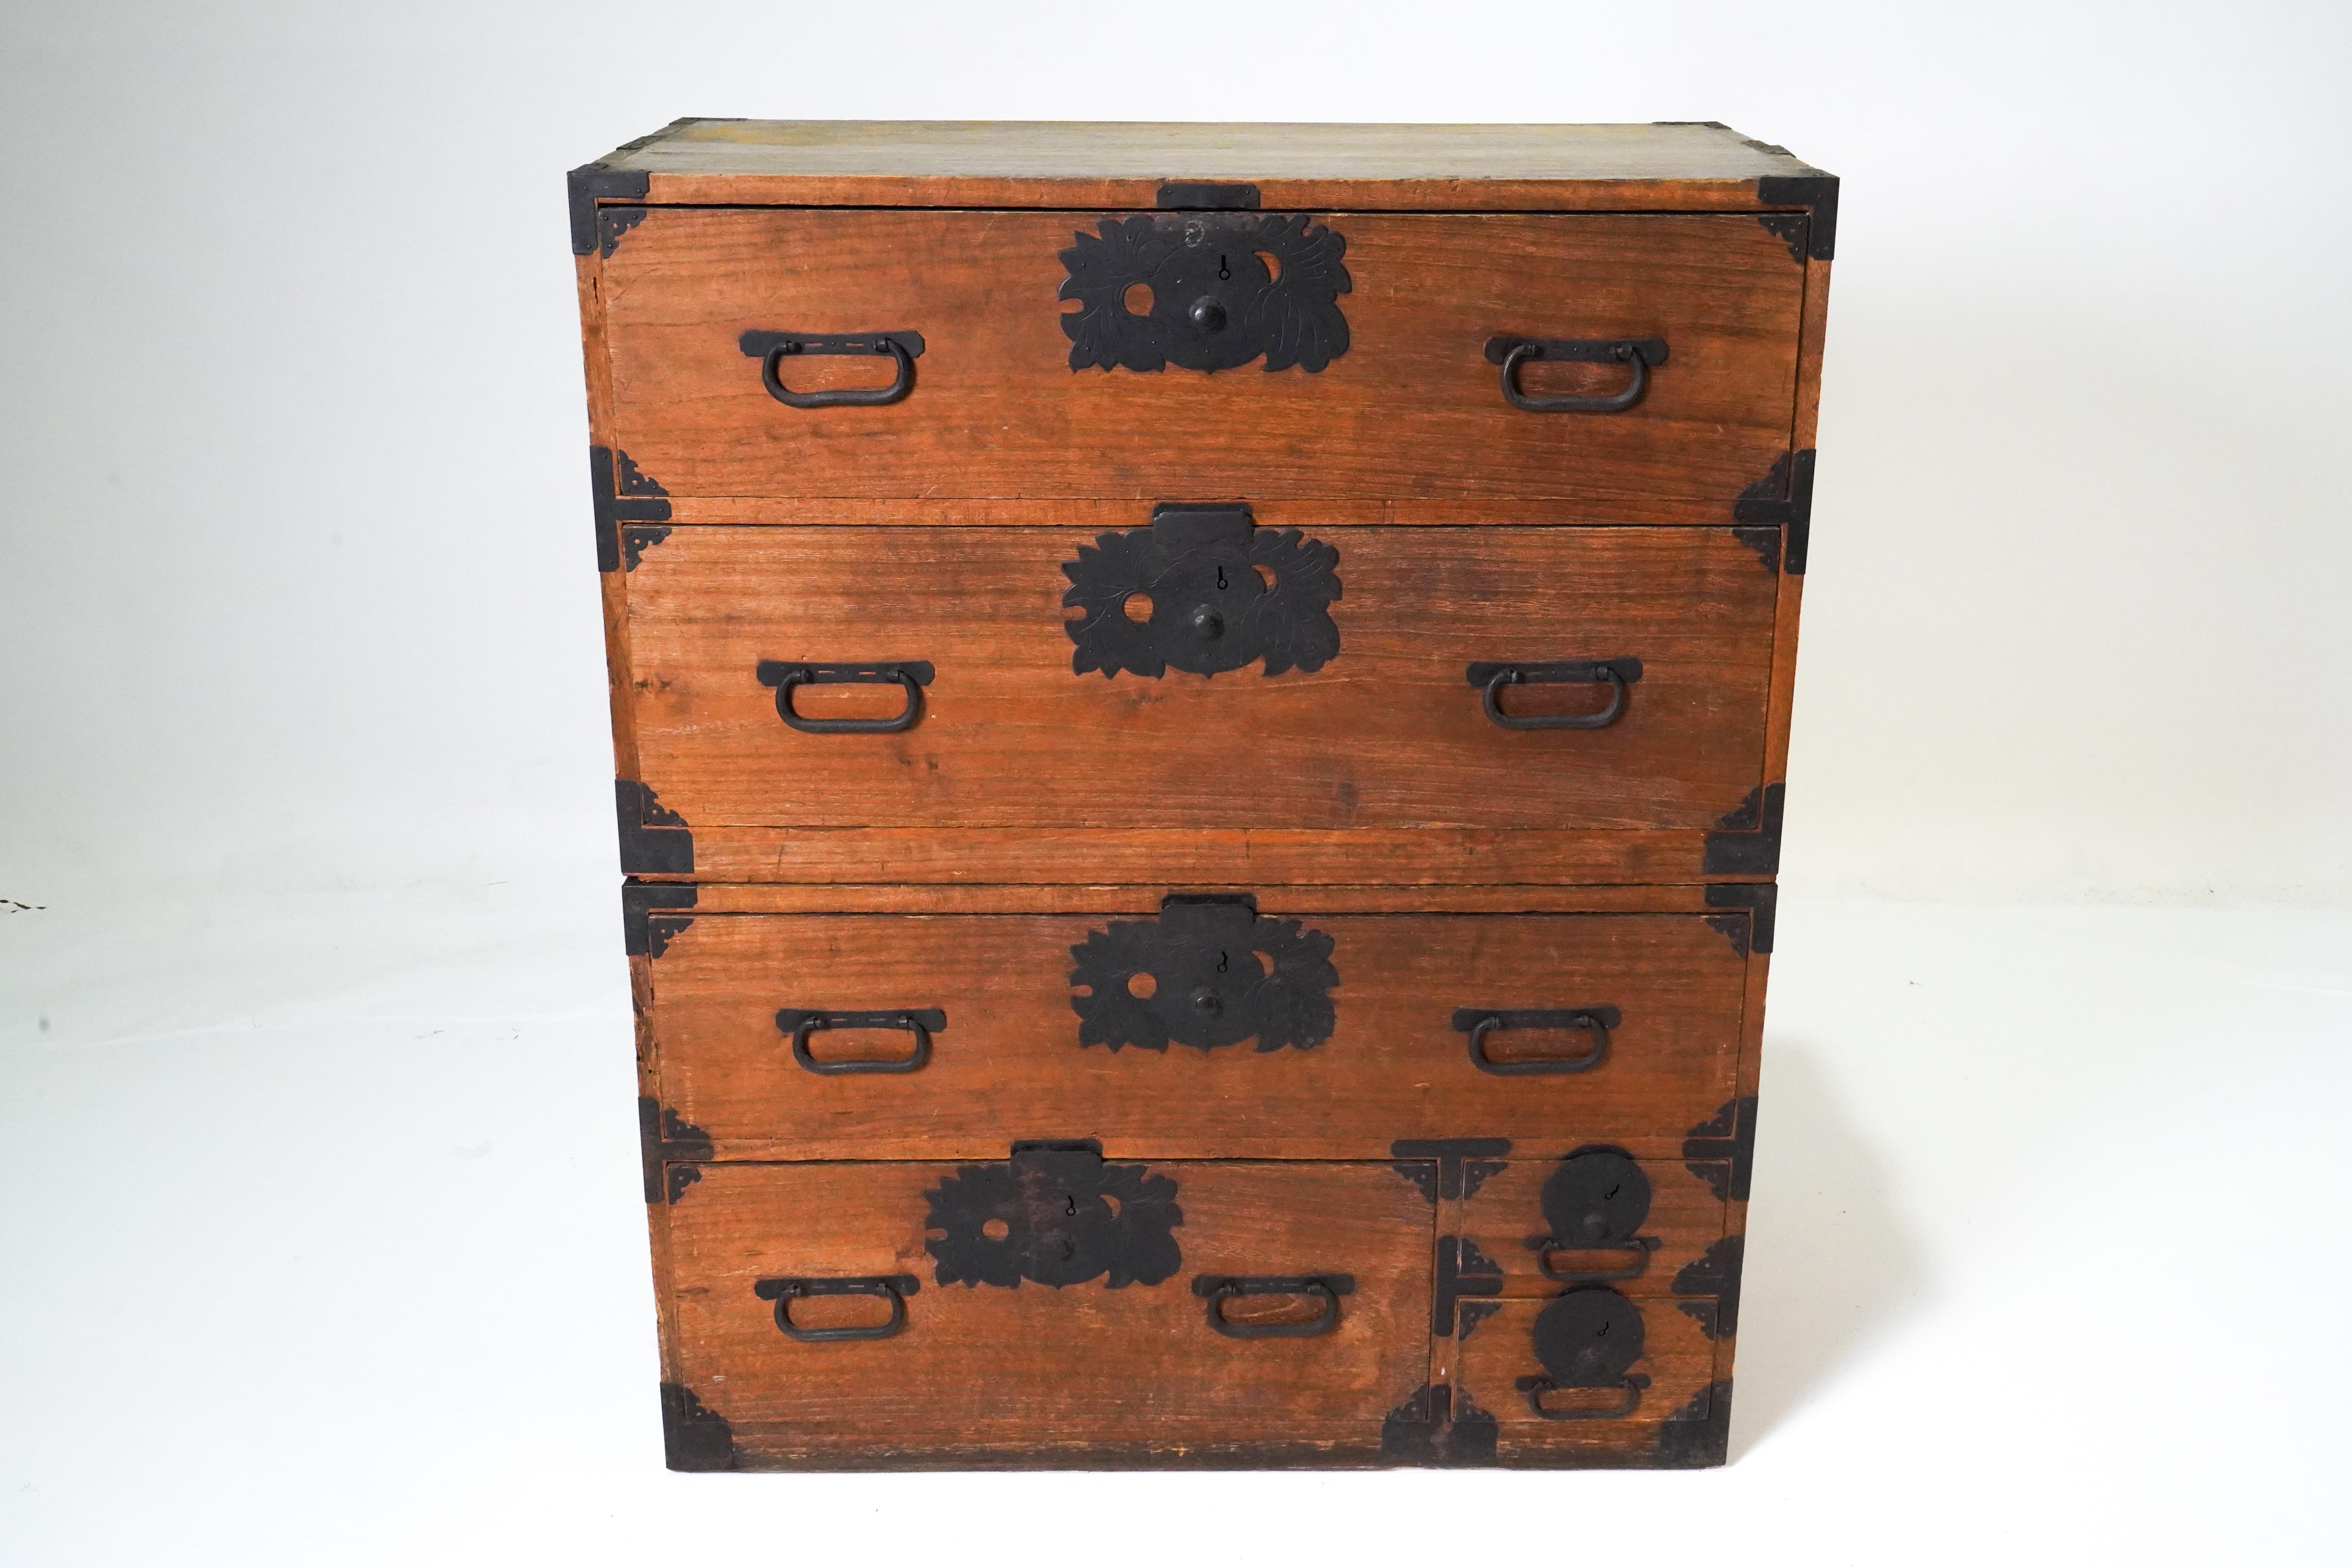 Japanese storage tansu chests were used to hold clothing and other personal effects in a 19th Century Japanese home. Because Japanese homes were (and are) relatively small, furniture was also relatively small. Rooms were used for multiple purposes